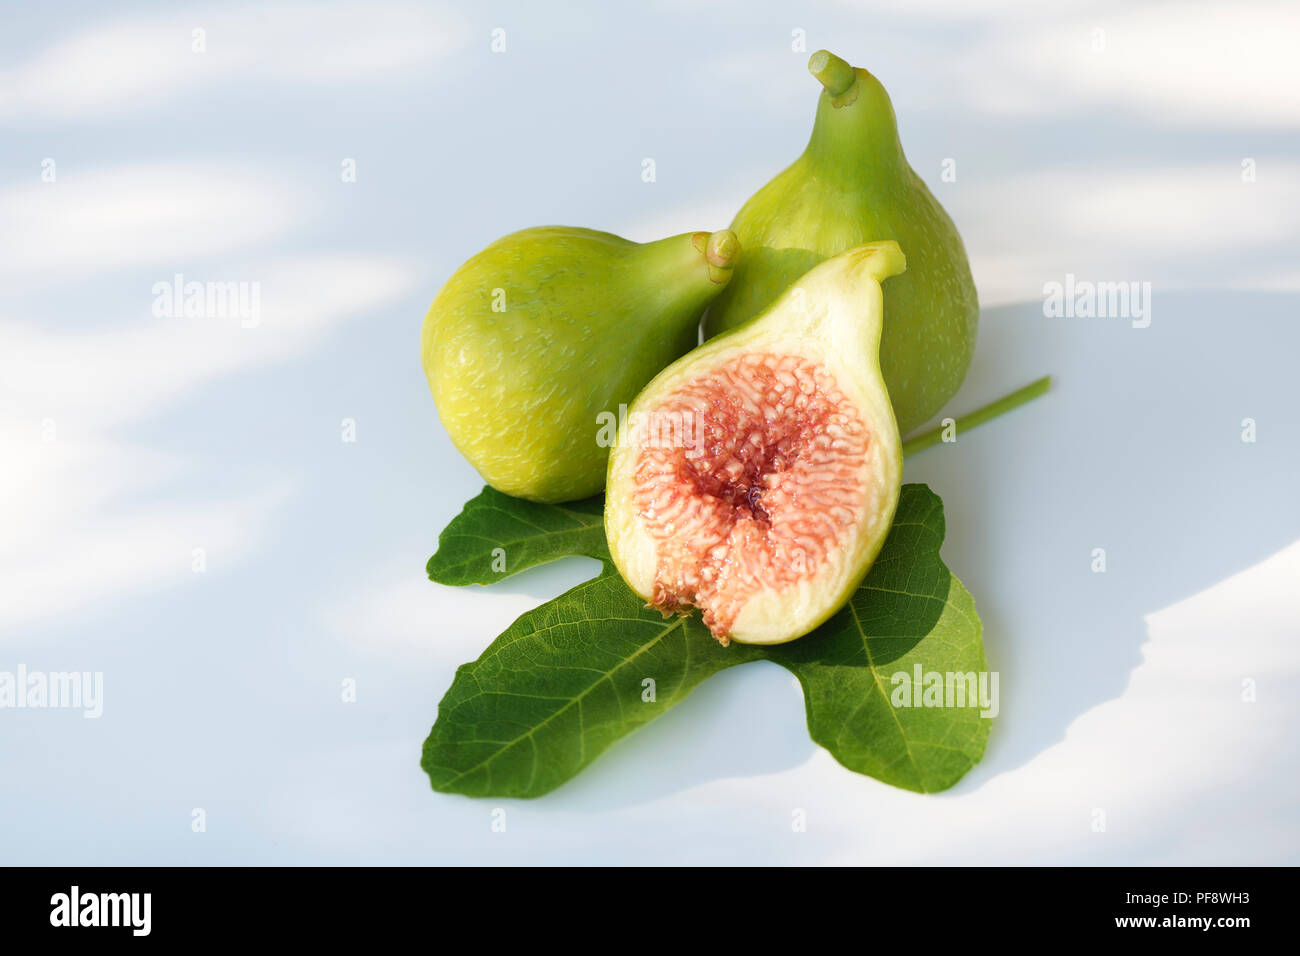 Freshly picked, ripe, organic Kadota figs on a fig leaf, with one fruit sliced in half showing red pulp, artistic food still life isolated on white ba Stock Photo